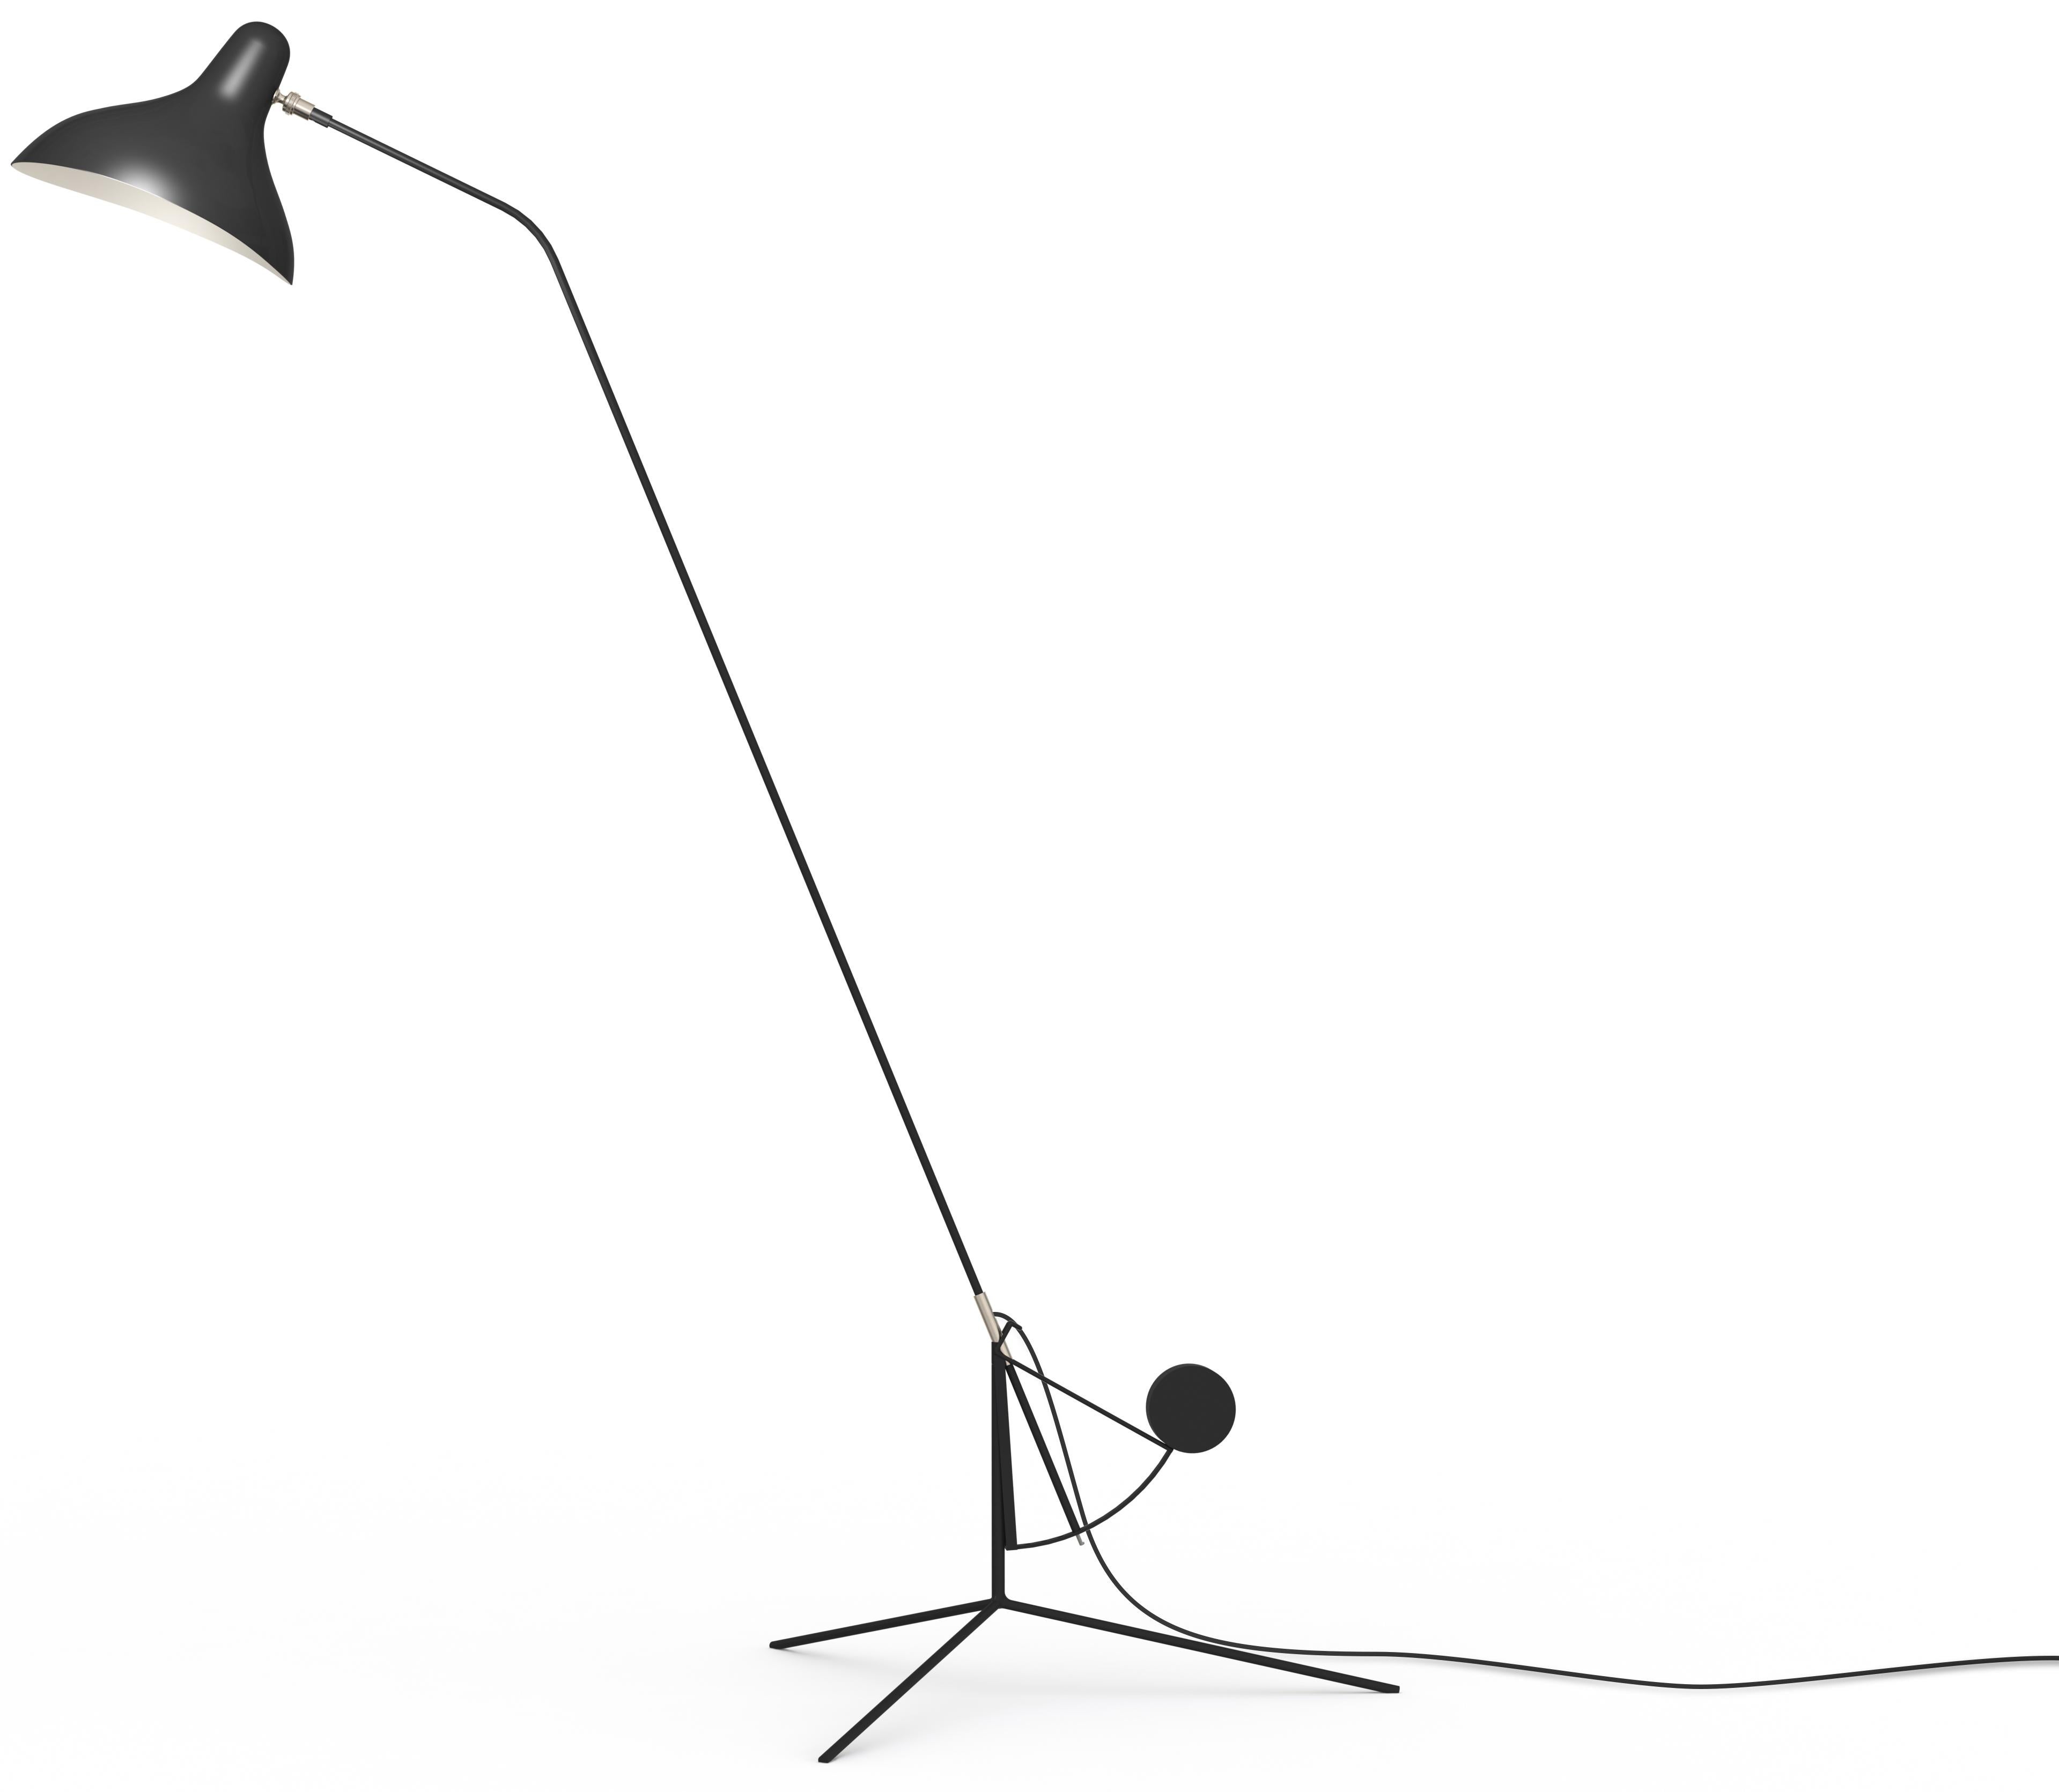 DCW Editions Mantis BS1 Floor Lamp in Black Steel and Aluminum by Bernard Schottlander
 
 The BS1 is like a manifesto of the Mantis collection. So elegant, of great finesse, this floor lamp defies the loies of weightlessness.
 
 Bernard Schottlander